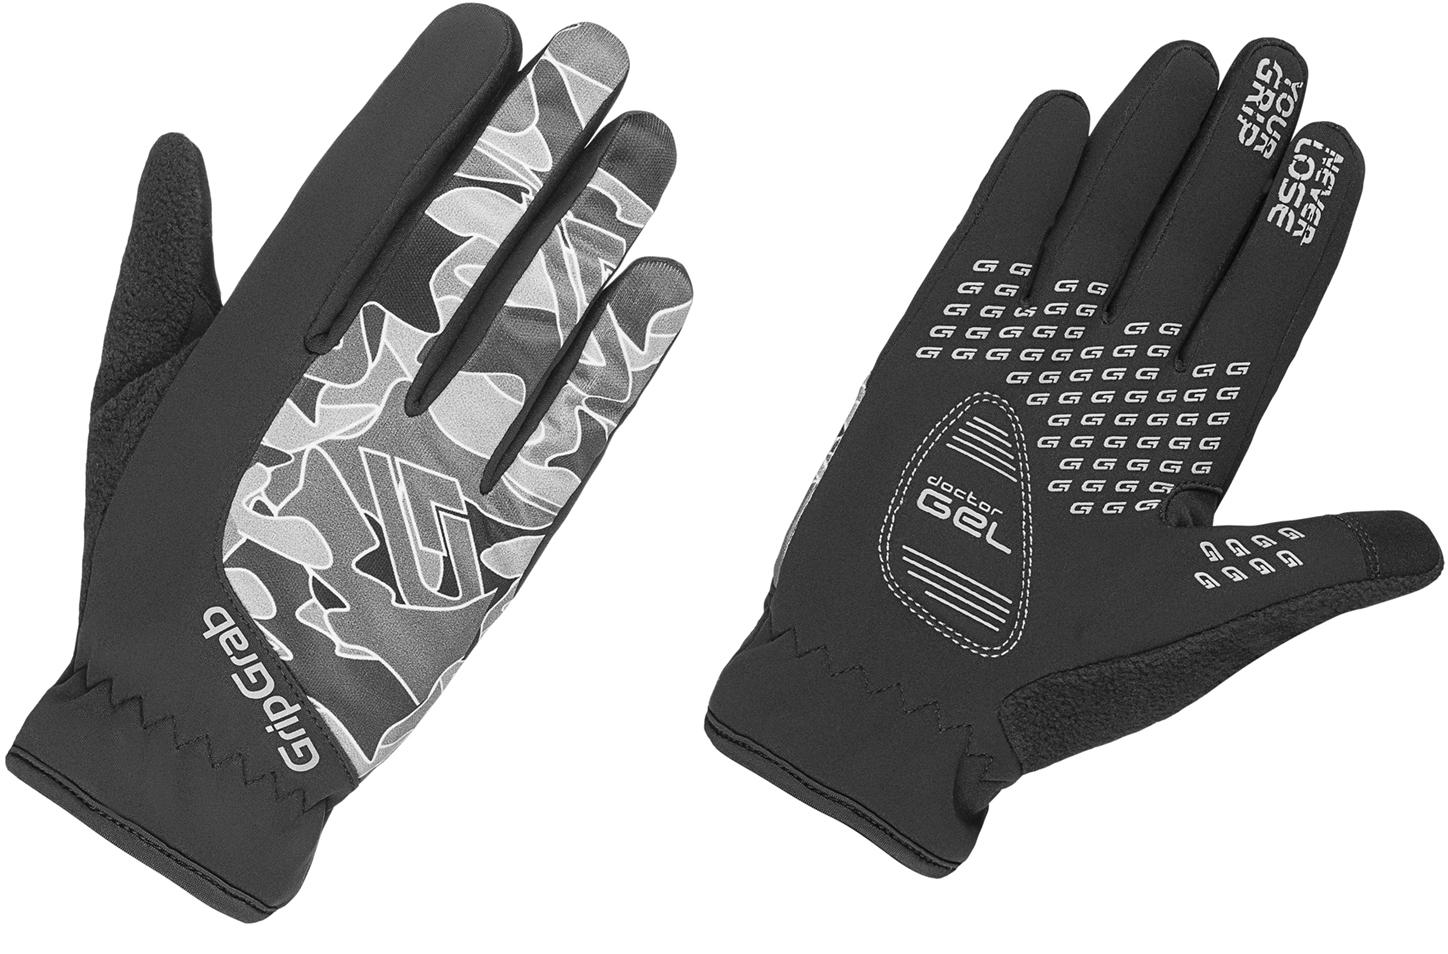 Gripgrab Rebel Youngster Windproof Winter Glove - Black/grey